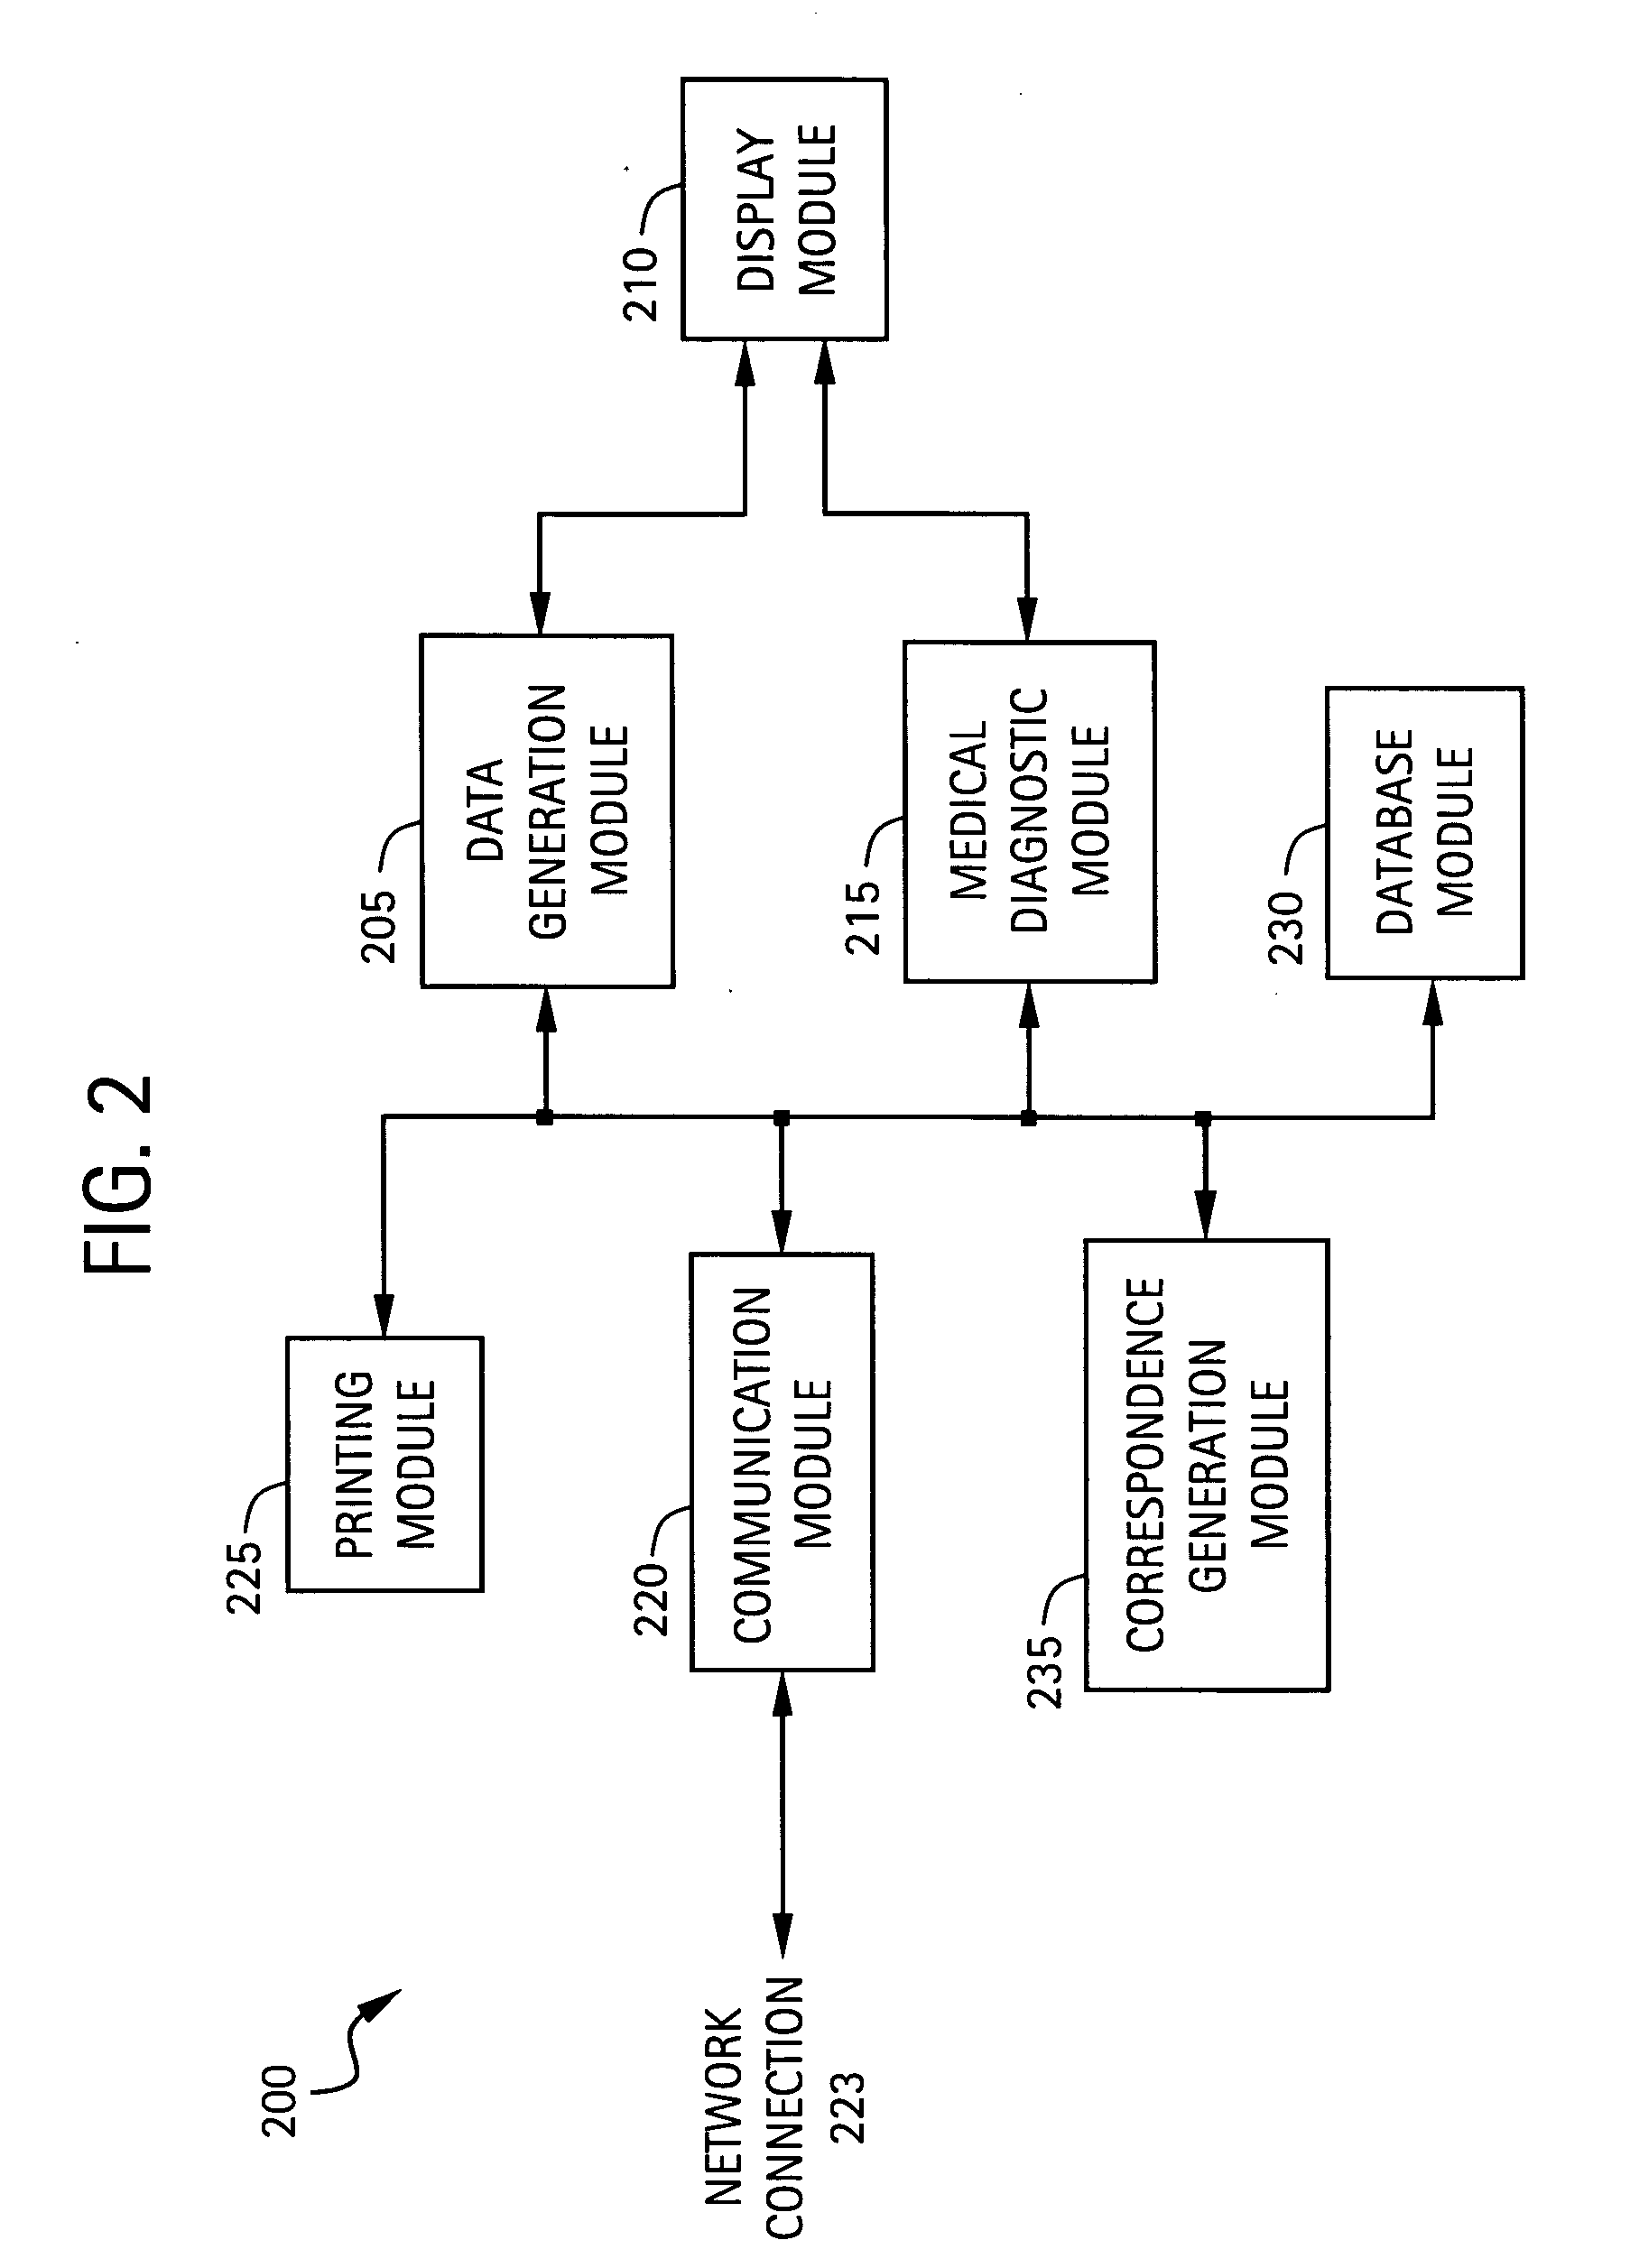 Healthcare provider data submission and billing system and method